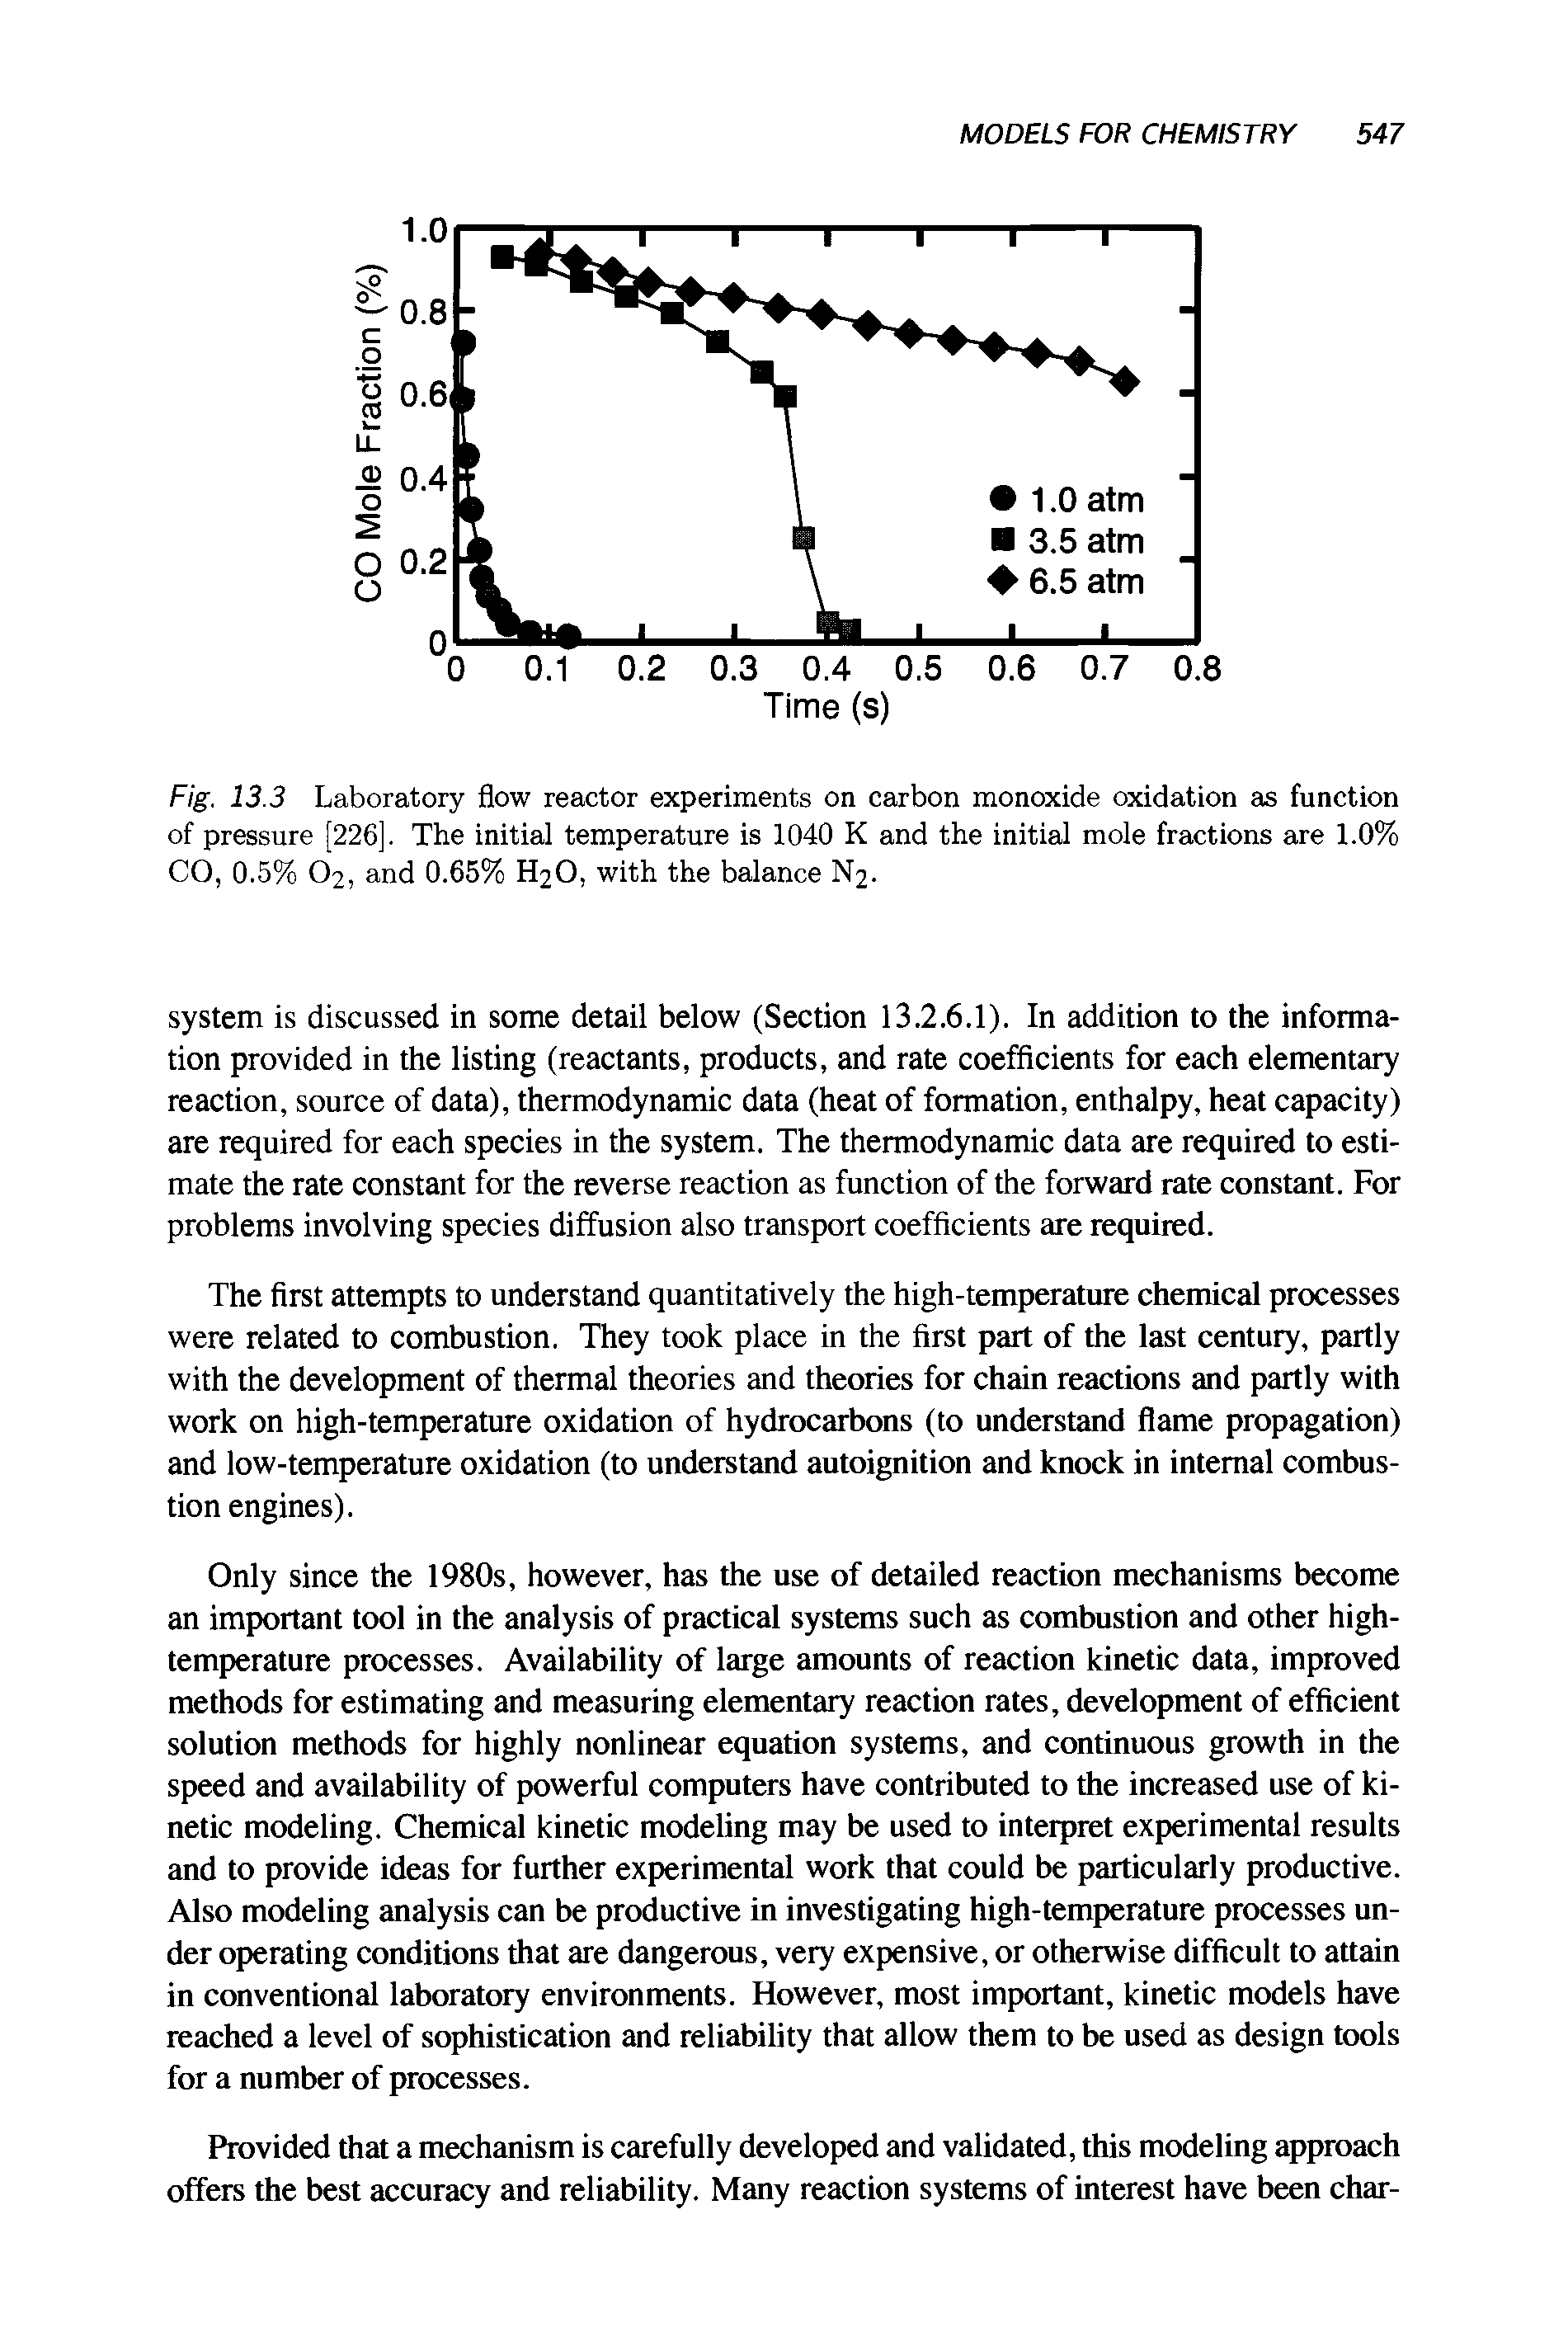 Fig. 13.3 Laboratory flow reactor experiments on carbon monoxide oxidation as function of pressure [226]. The initial temperature is 1040 K and the initial mole fractions are 1.0% CO, 0.5% O2, and 0.65% H2O, with the balance N2.